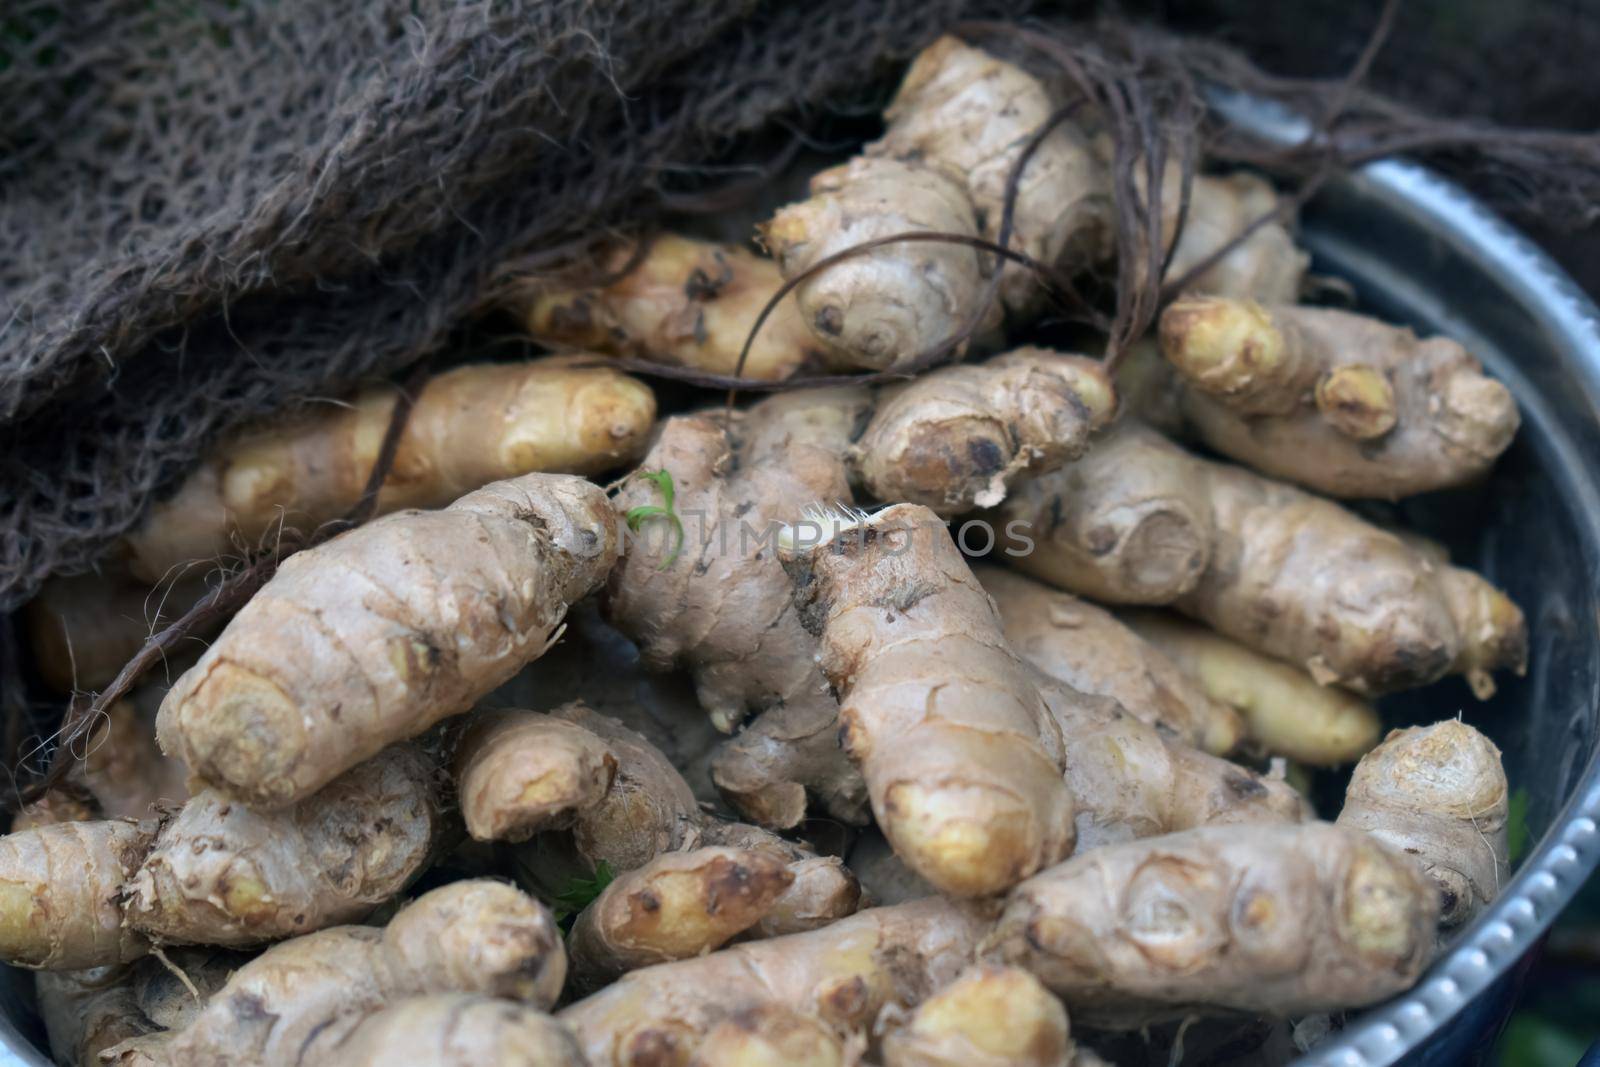 A closeup shot of a pile of fresh ginger in a market place